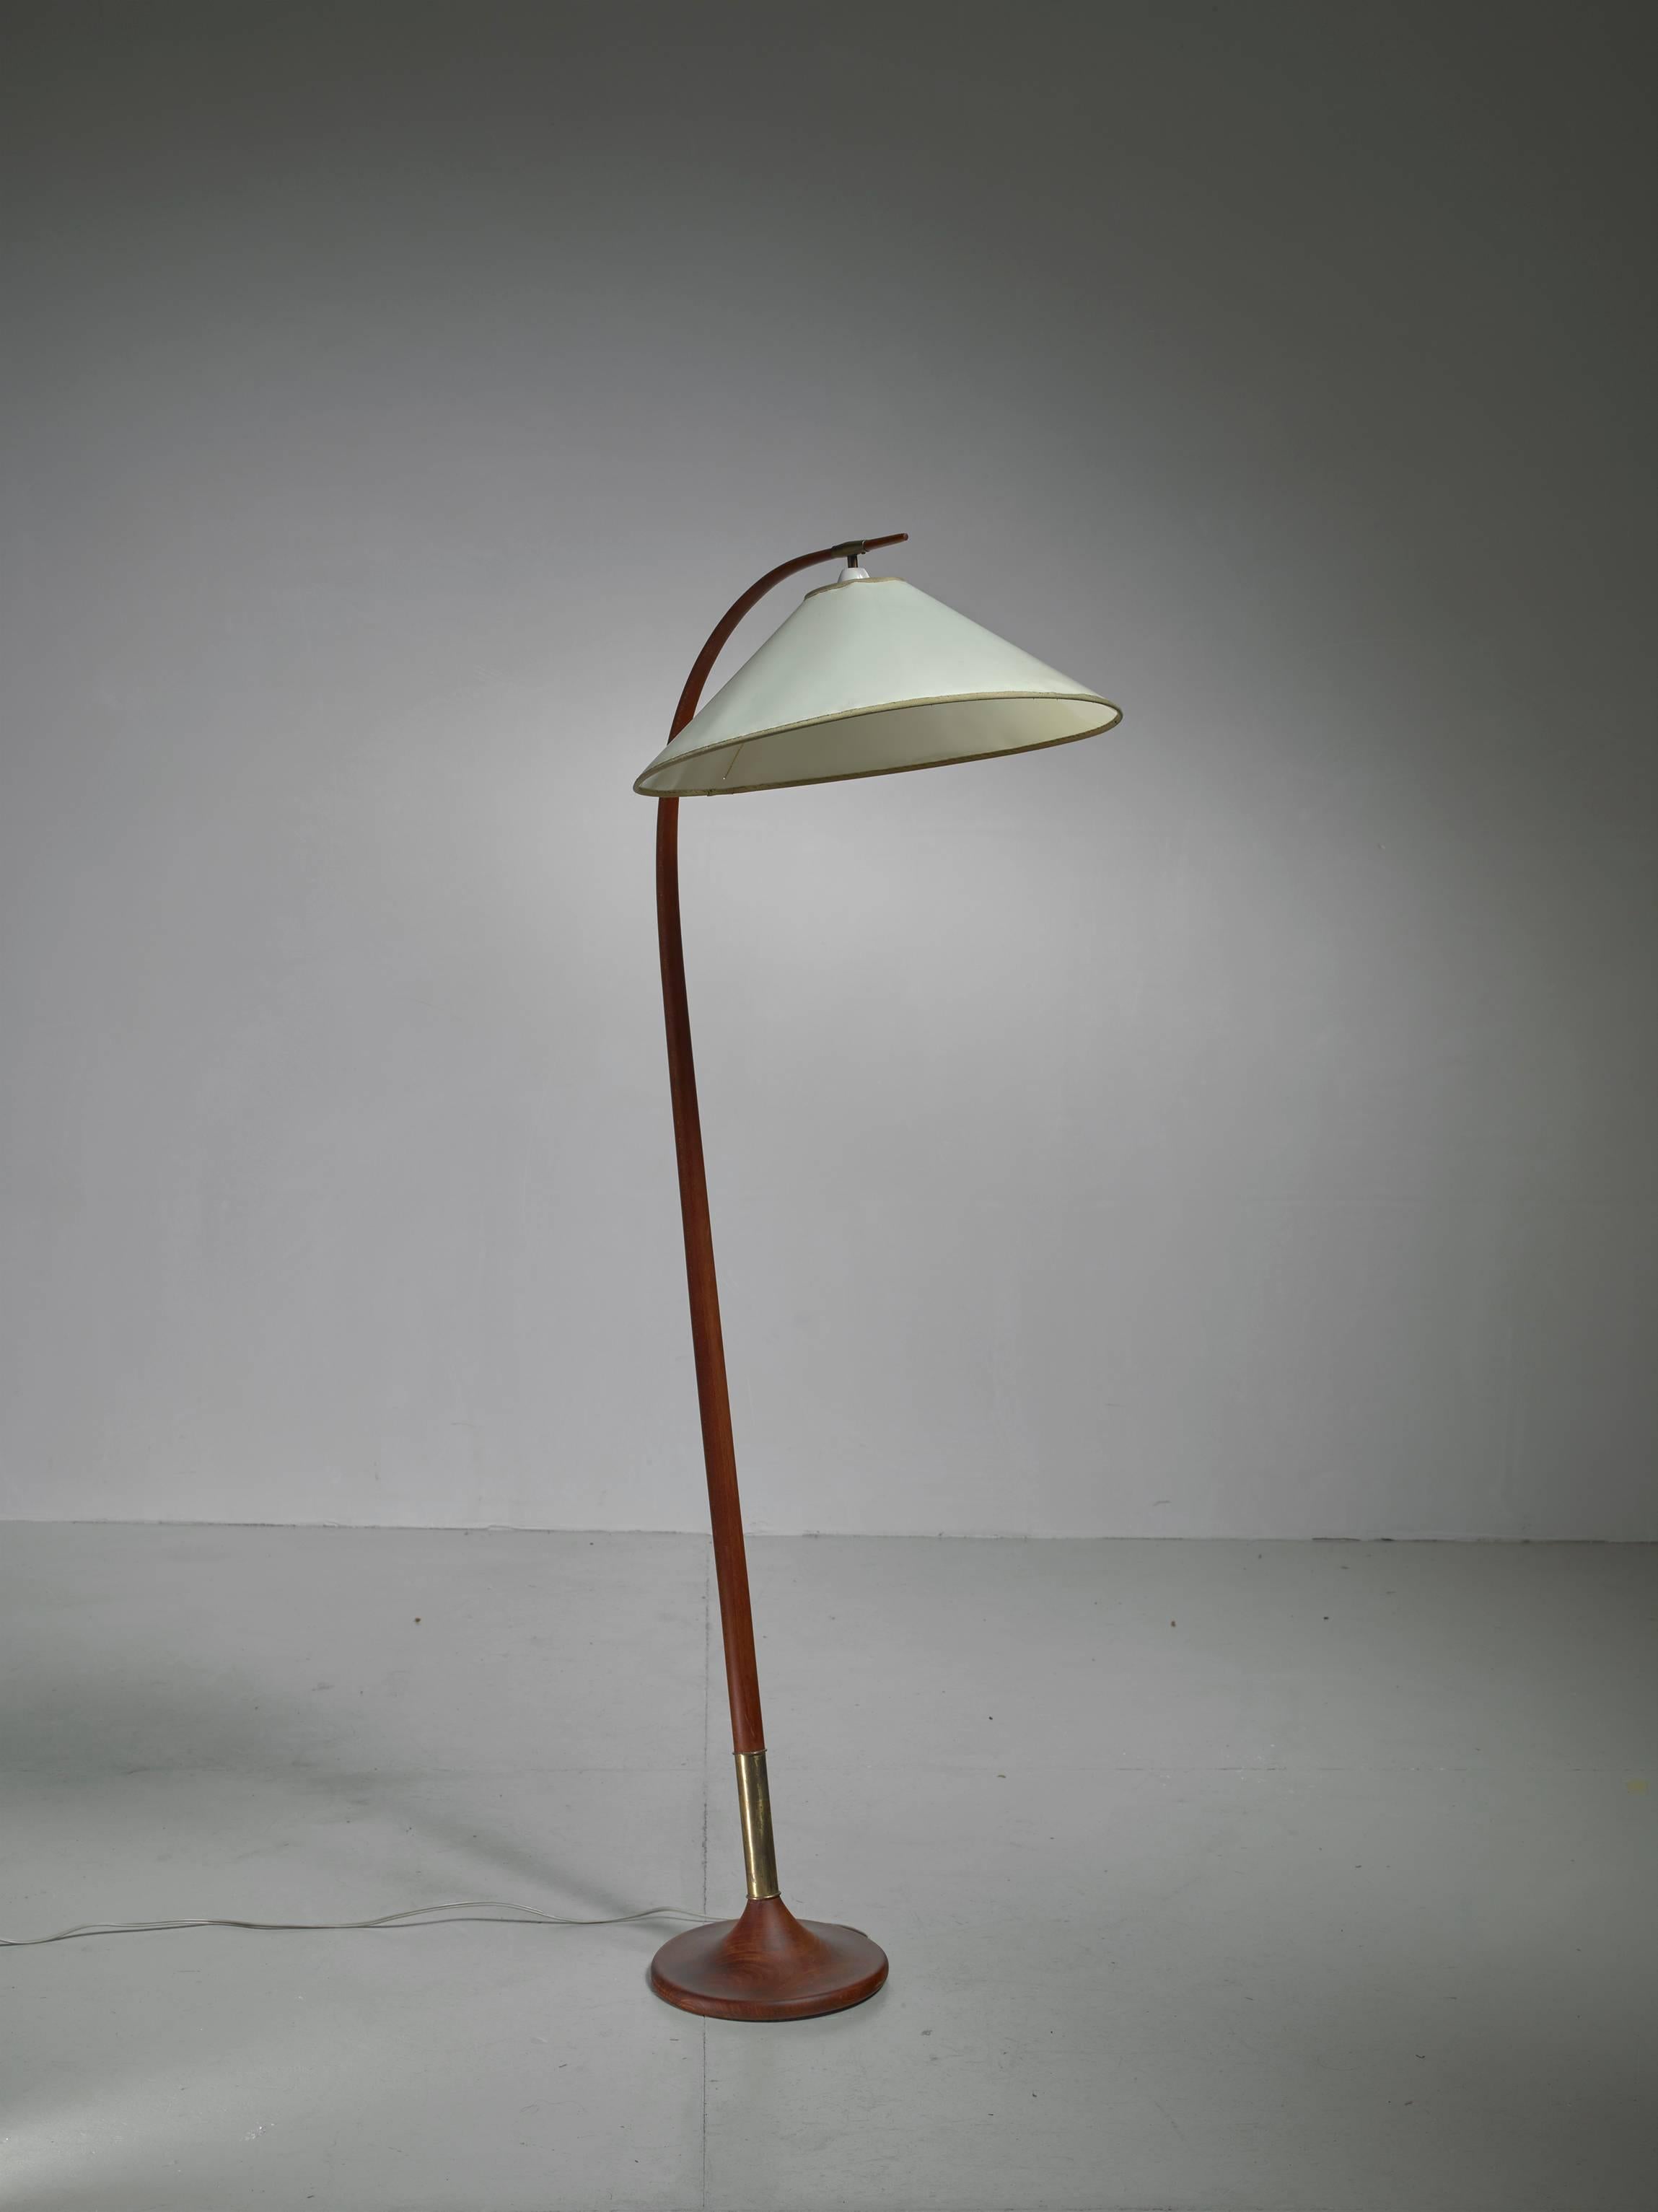 An elegant floor lamp by Danish designer Severin Hansen Jr. The lamp is made of a curved, stained beech frame with brass elements at the foot and where the shade is connected to the frame. The lamp has an old, off-white plastic shade.
Beautiful